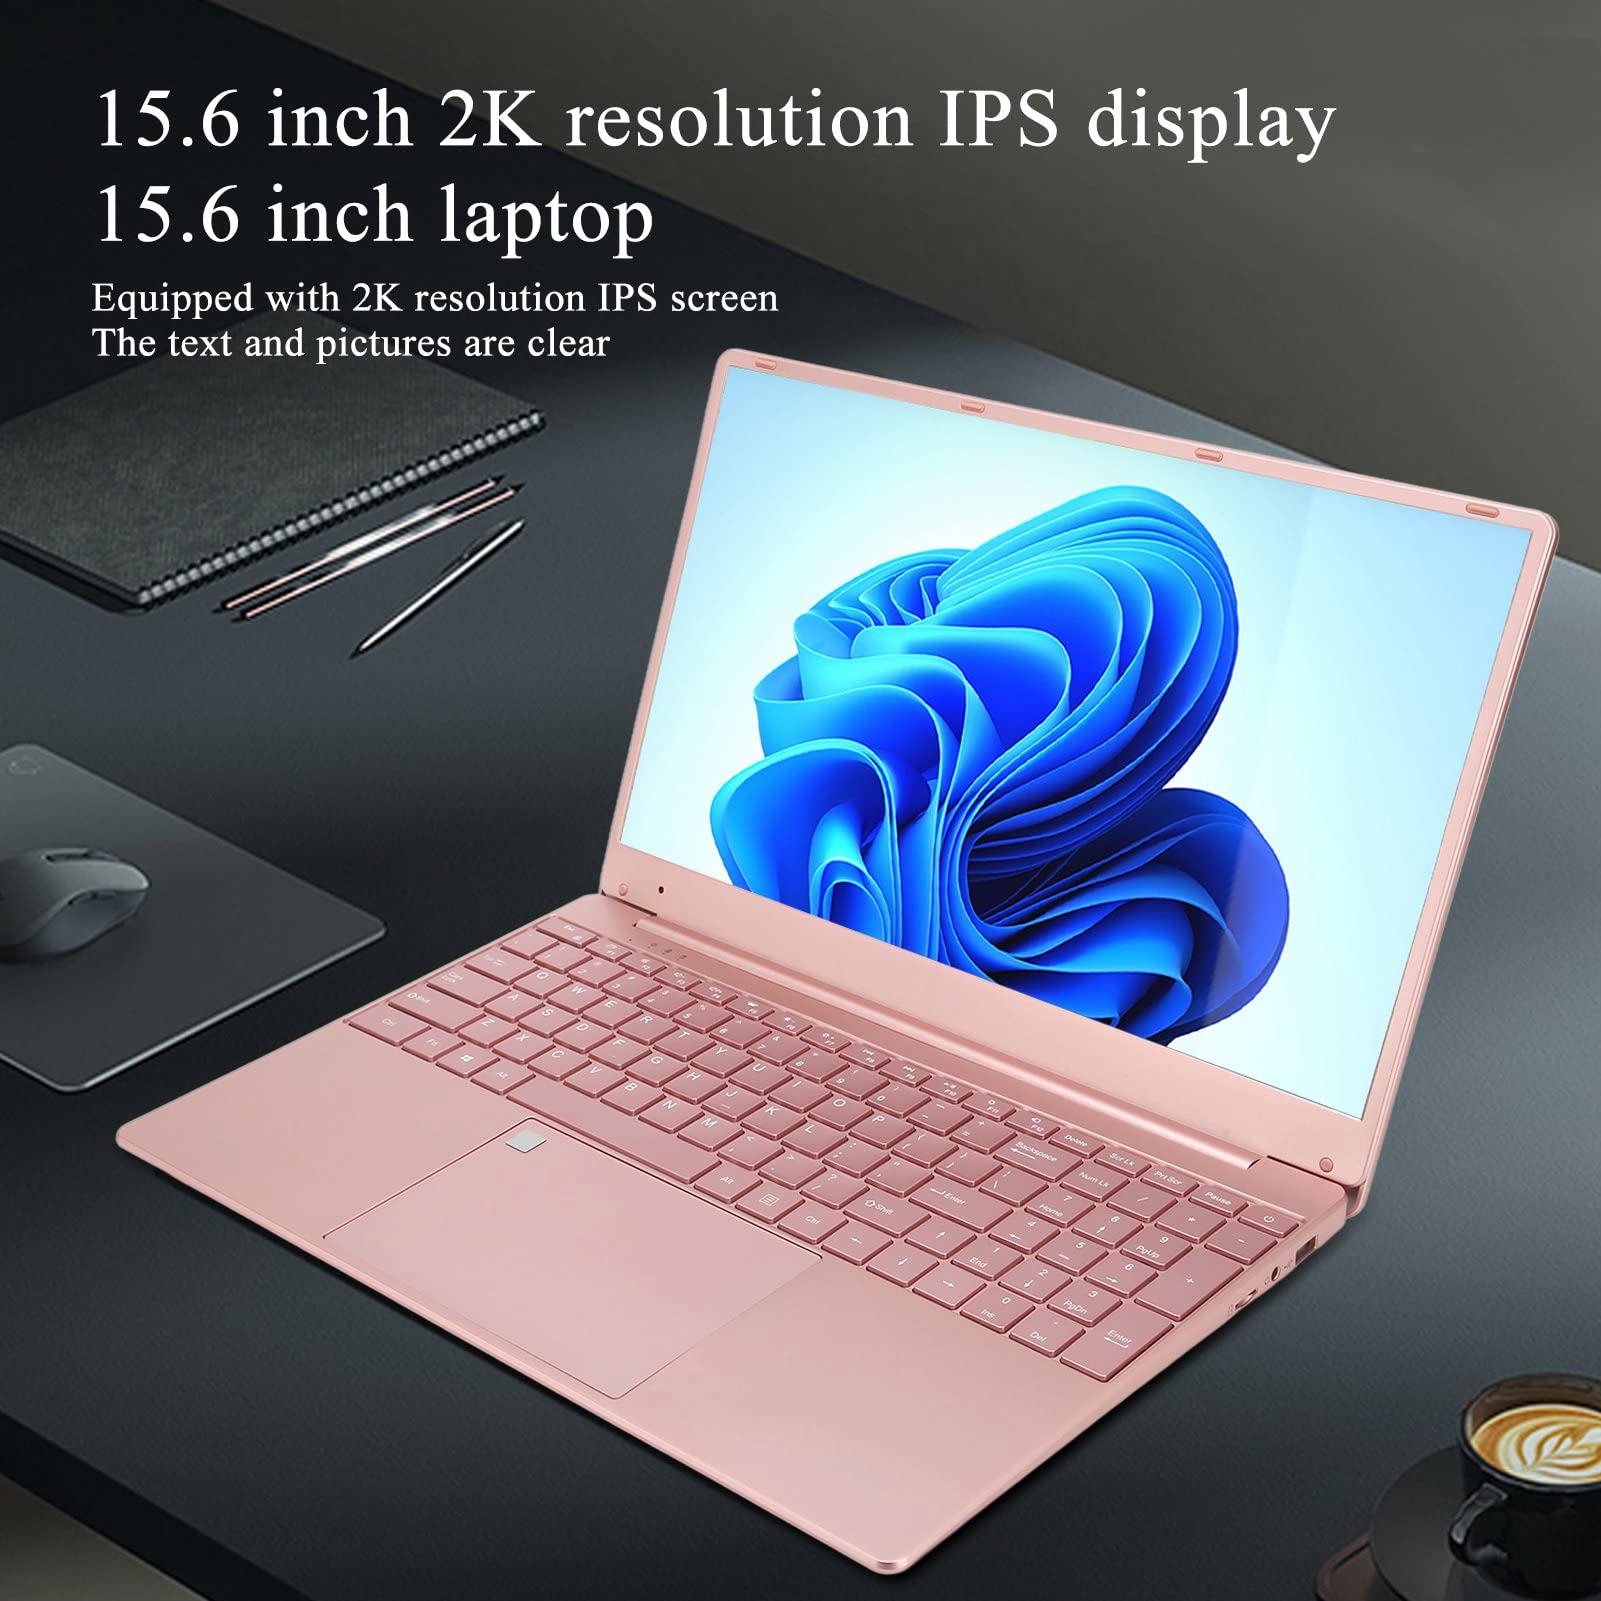 GOWENIC 15.6 Inch Laptop, HD IPS Laptop with Intel Celeron N5095 Quad Core Processor, Backlit Keyboard, Touchpad, 16GB RAM and 256G SSD, Mini HDMI, Bluetooth for Windows 10 (16+256G US Plug)